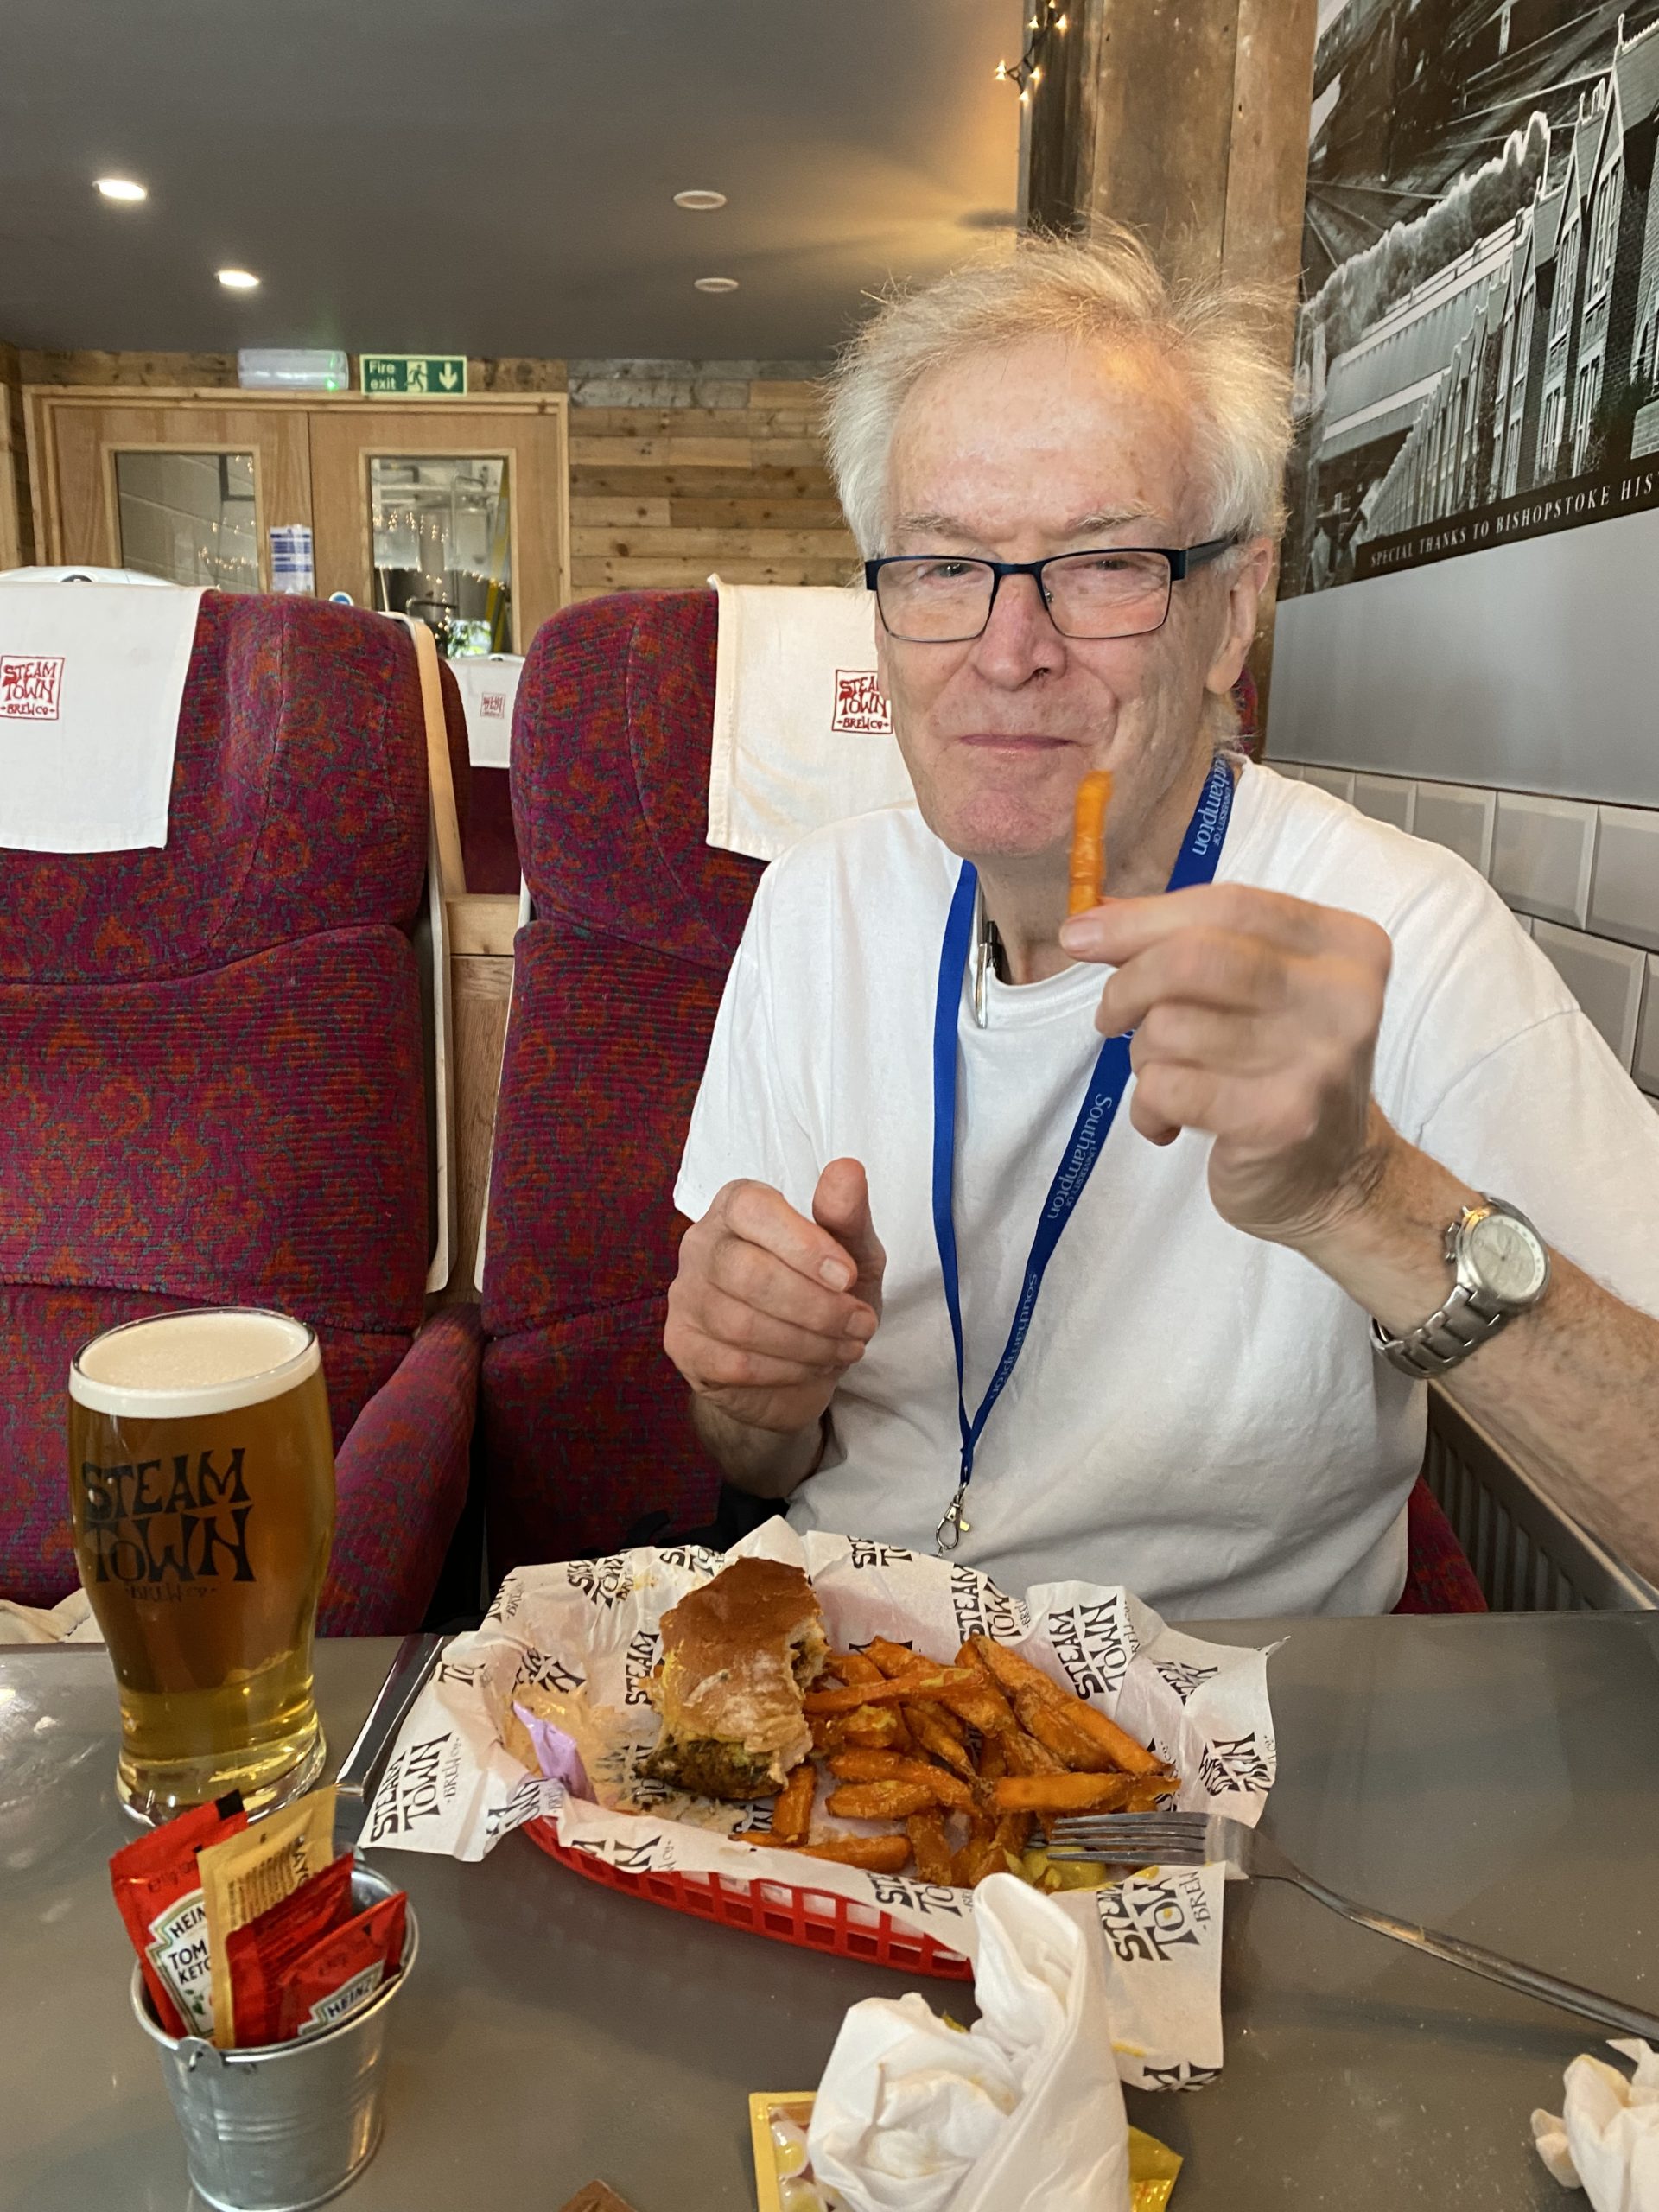 A man sat in a restaurant or diner with a burger and chips and a pint of beer